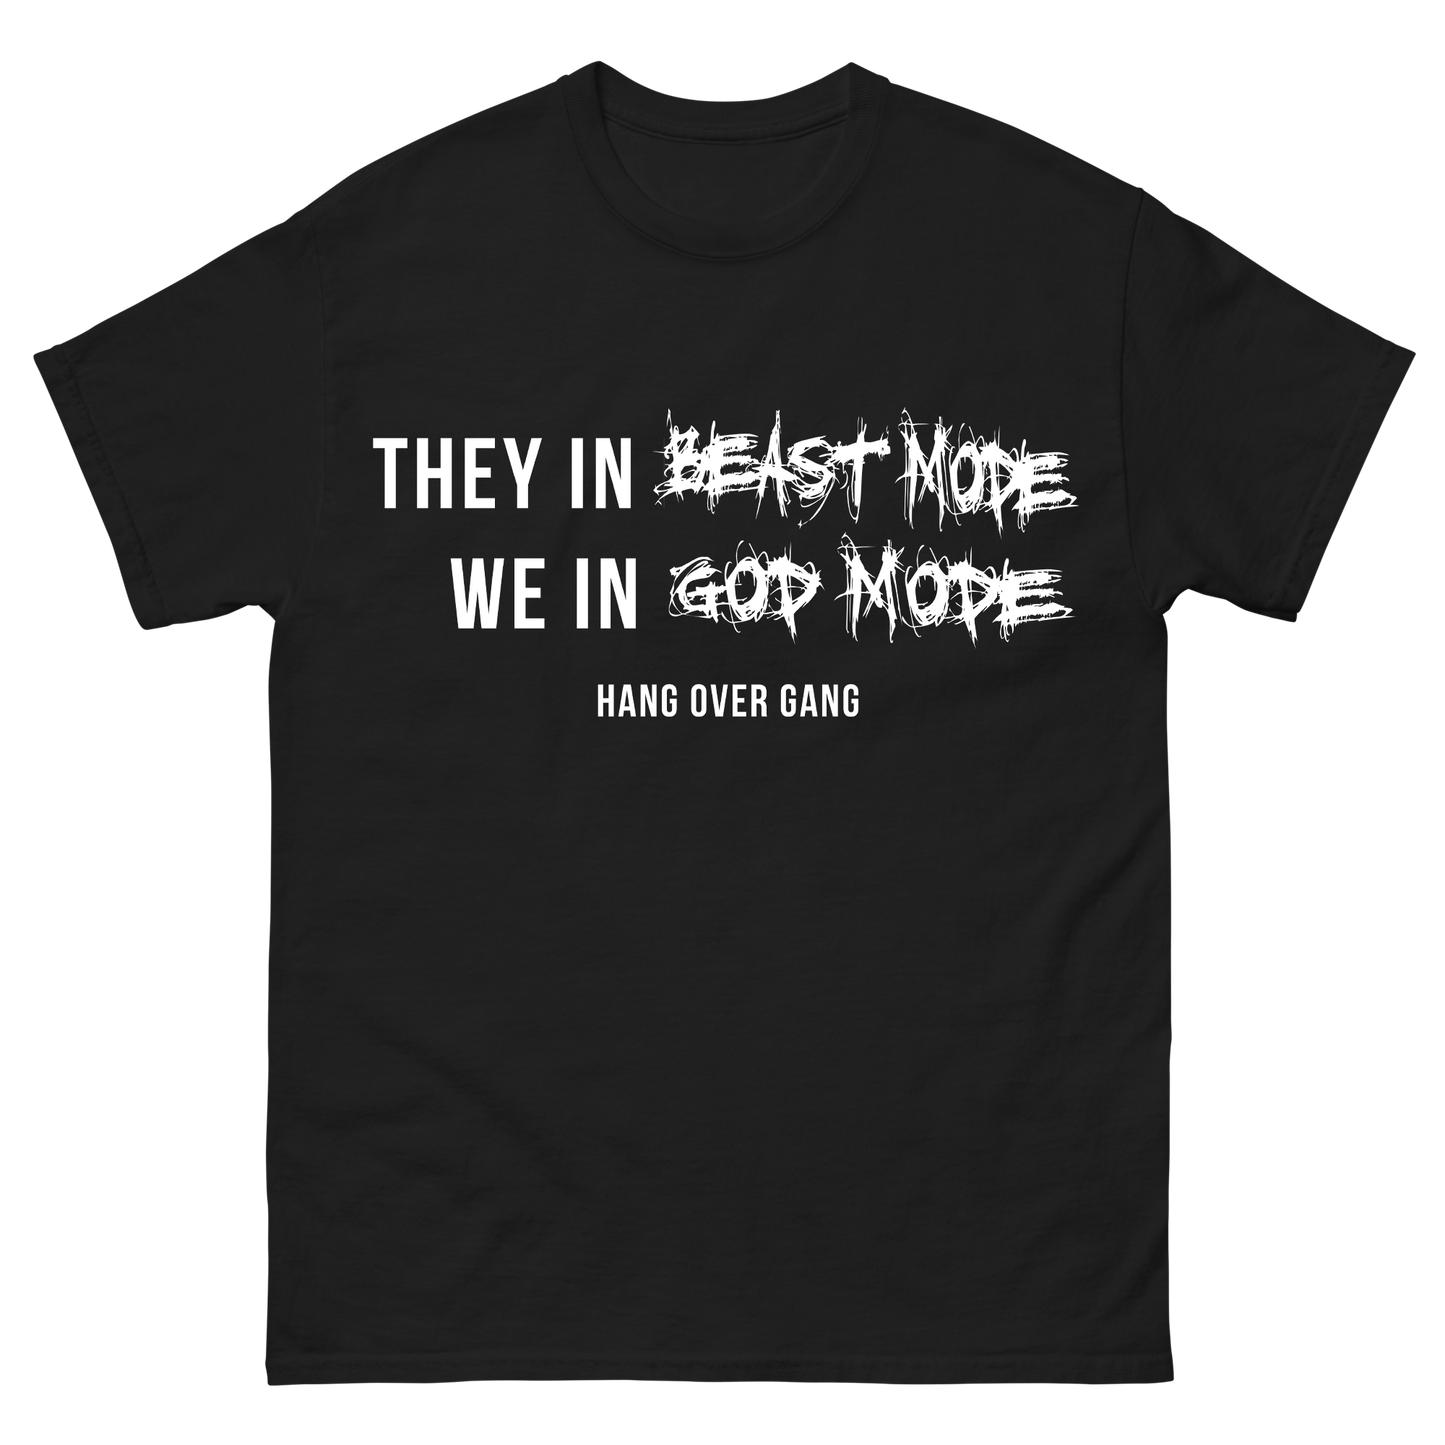 "They in Beast Mode,We in God Mode" T-Shirt